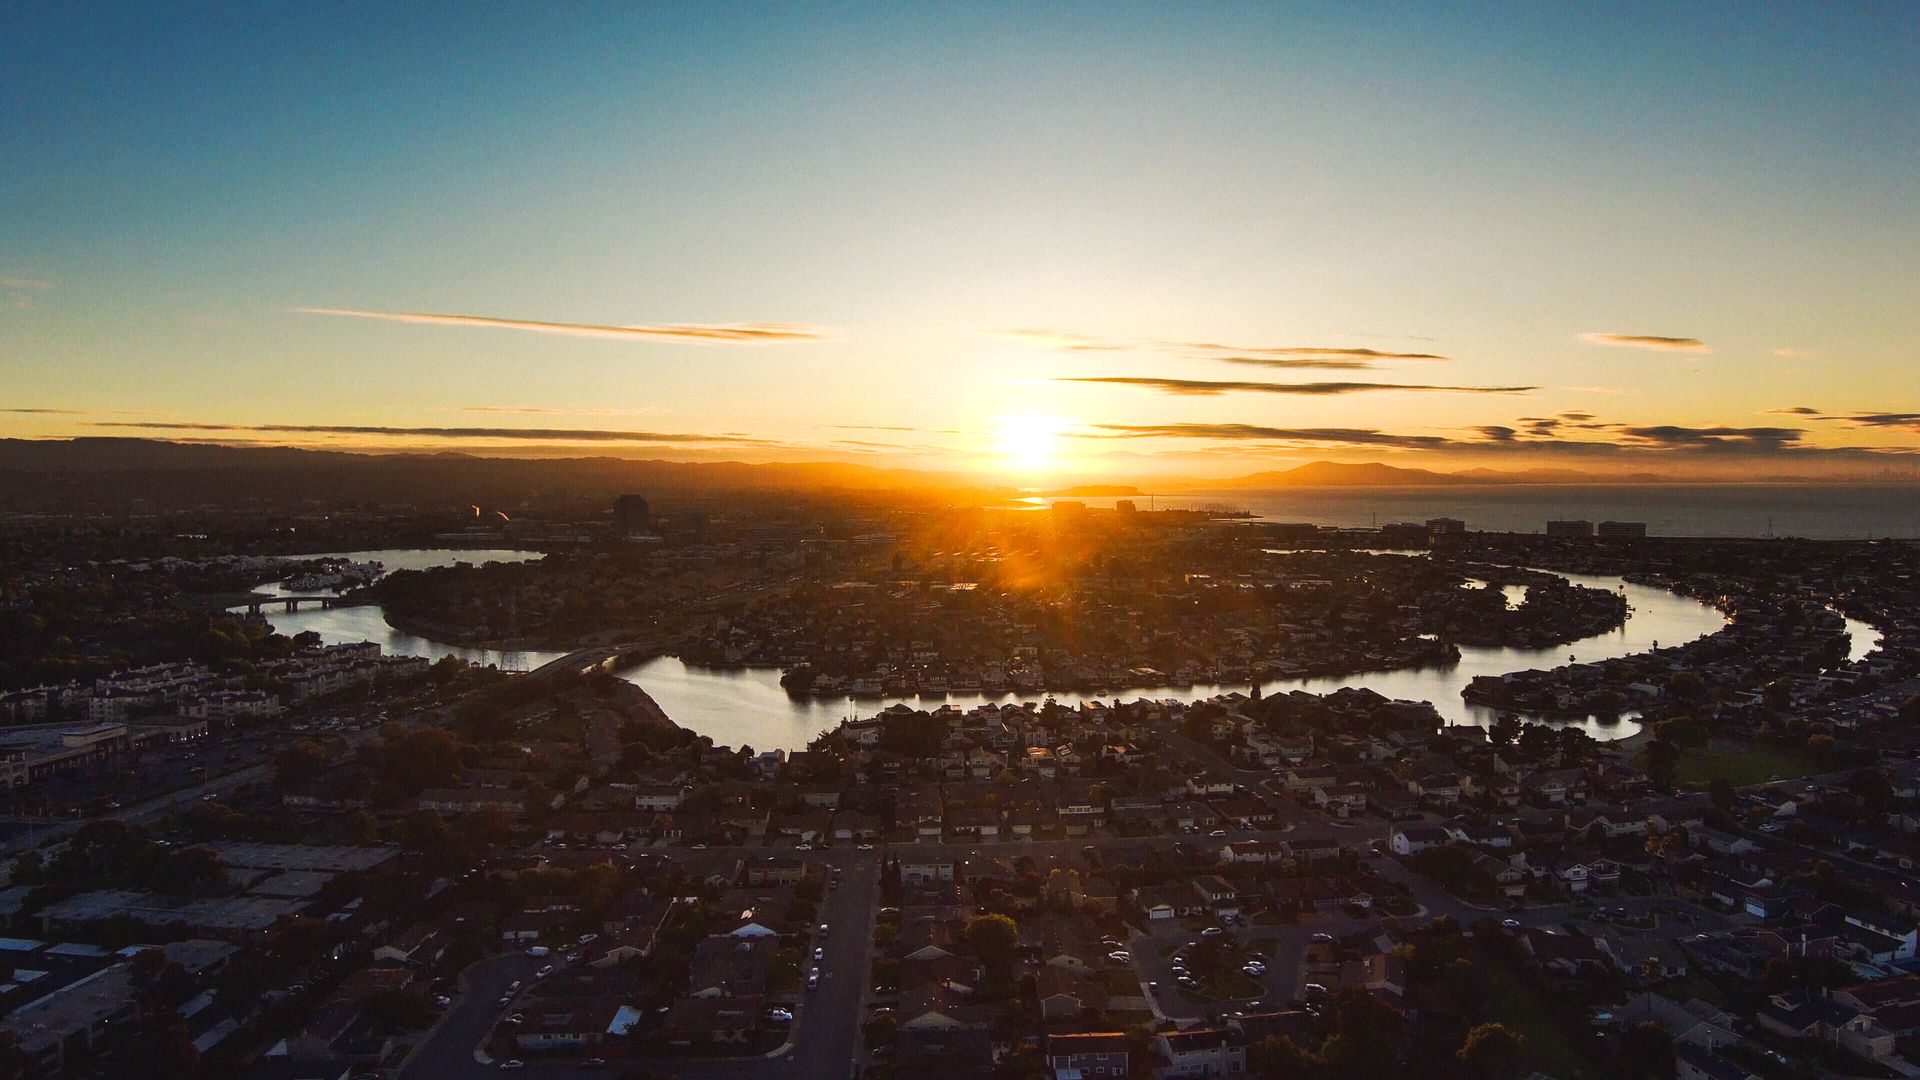 Alice Cheng Skydio Drone Photography